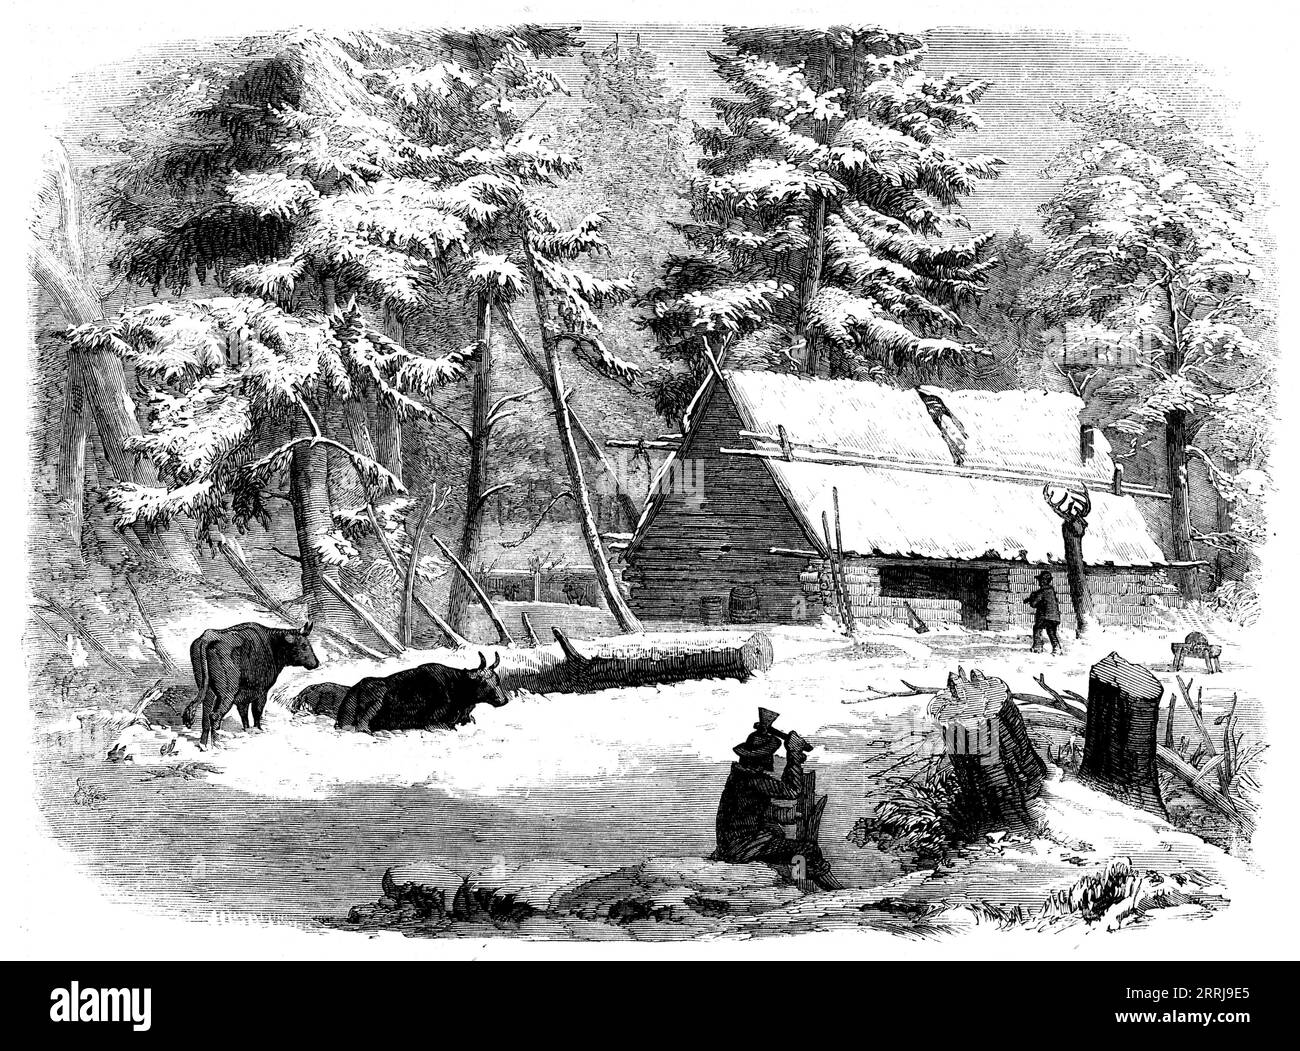 Lumbering in New Brunswick - Lumberman's Camp-house, [Canada], 1858. 'The lumbering business is the leading element of wealth in the province; and the sawmills, which are found collected at the mouths of all its rivers, as well as the building of ships, and the business of transportation to the mother country, give employment to a very large proportion of the population...The site for operations having been selected, a camp-house is erected and covered with the bark of trees. The floor of the cabin is made of small poles, and a sort of platform is raised for the general bed, which is composed Stock Photo